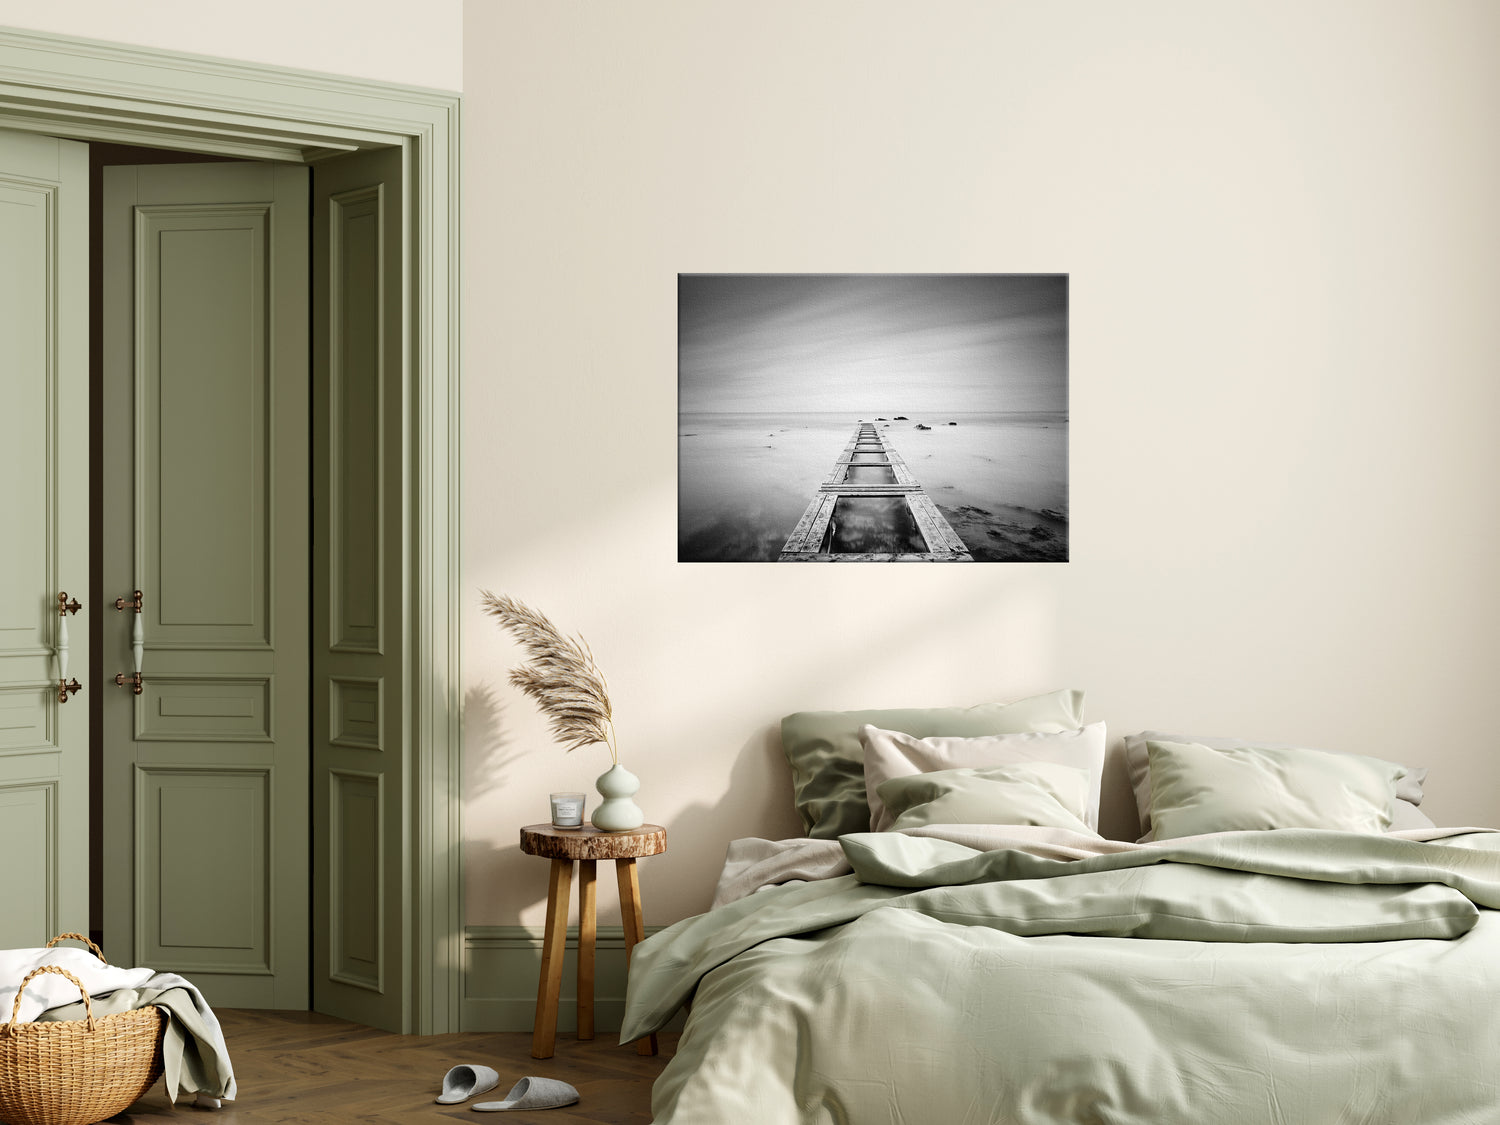 Sets the Mood: The right artwork can transform the atmosphere of a room. Choose calming colors and imagery for a relaxing space, or bold pieces to add energy and excitement.